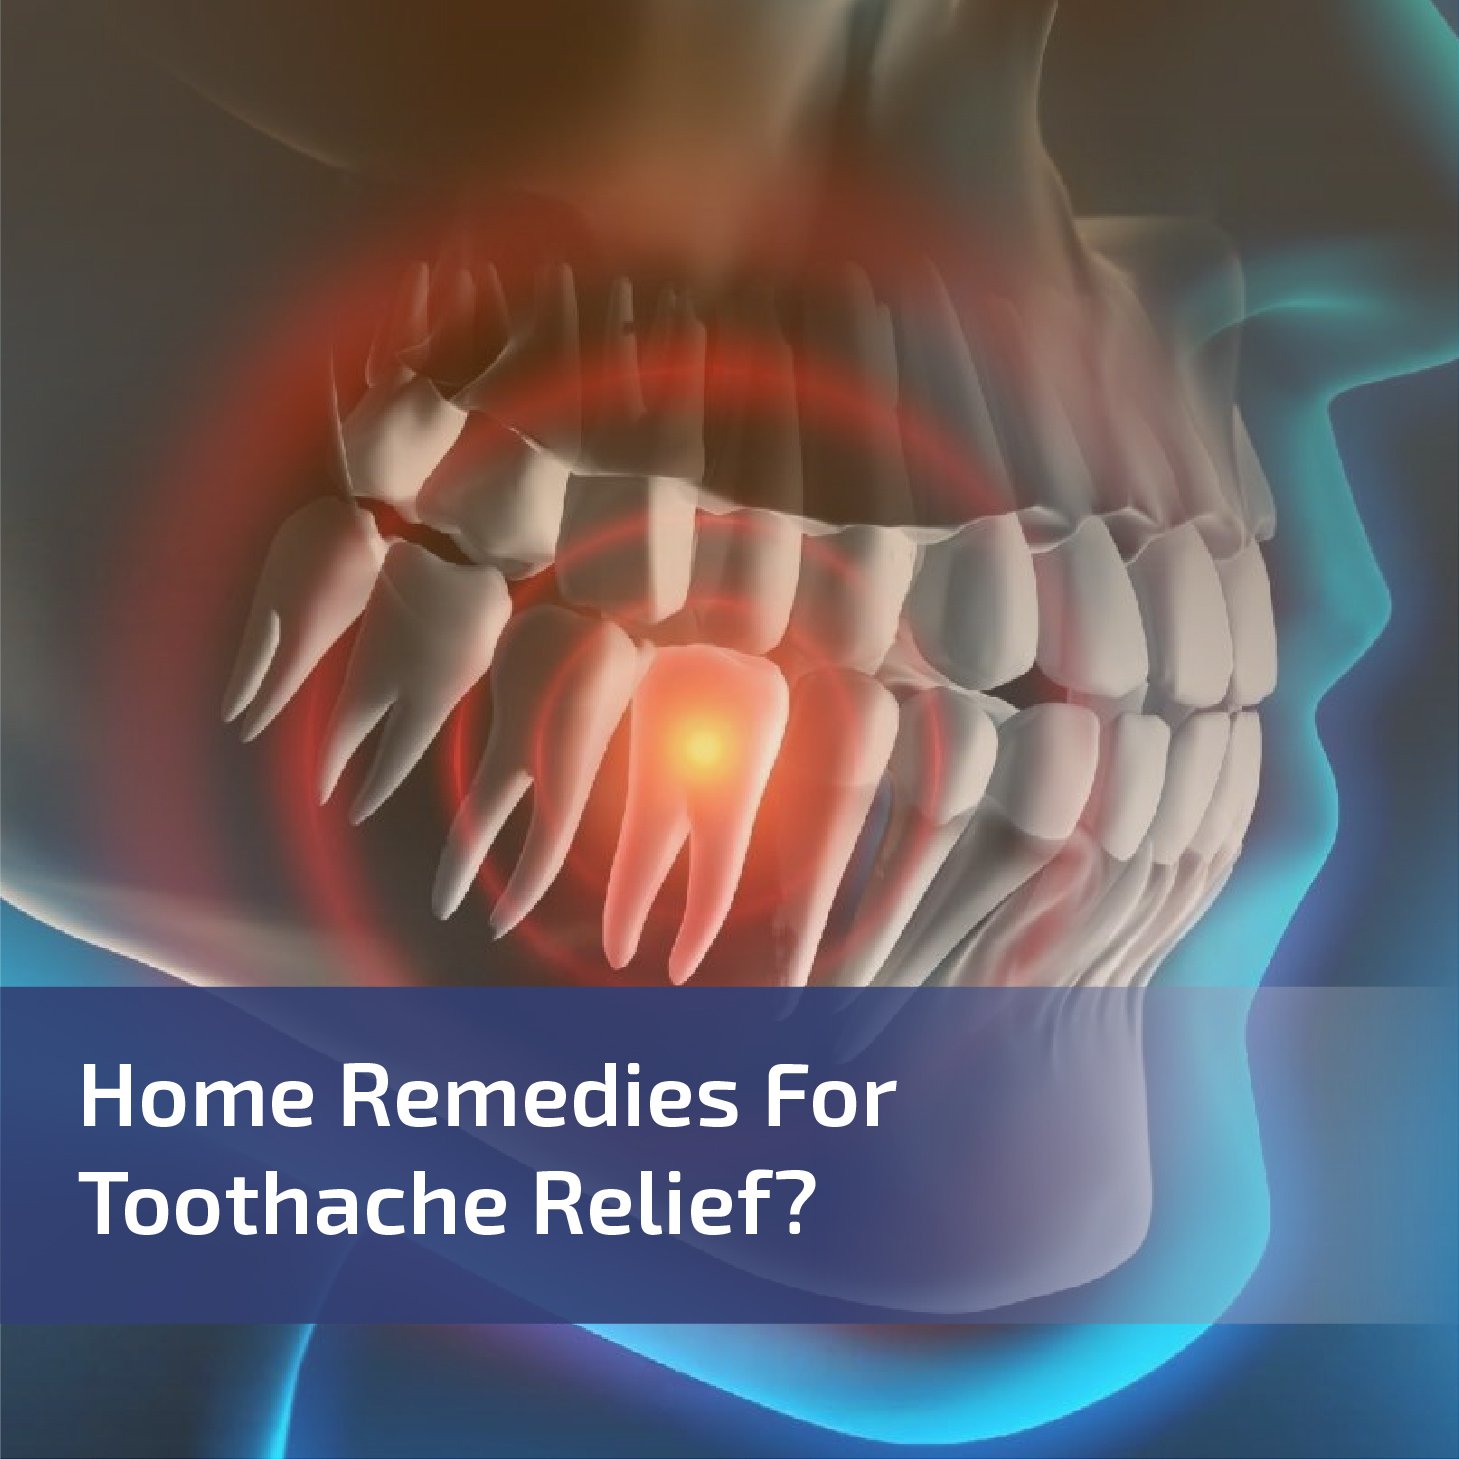 Home Remedies For Toothache Relief